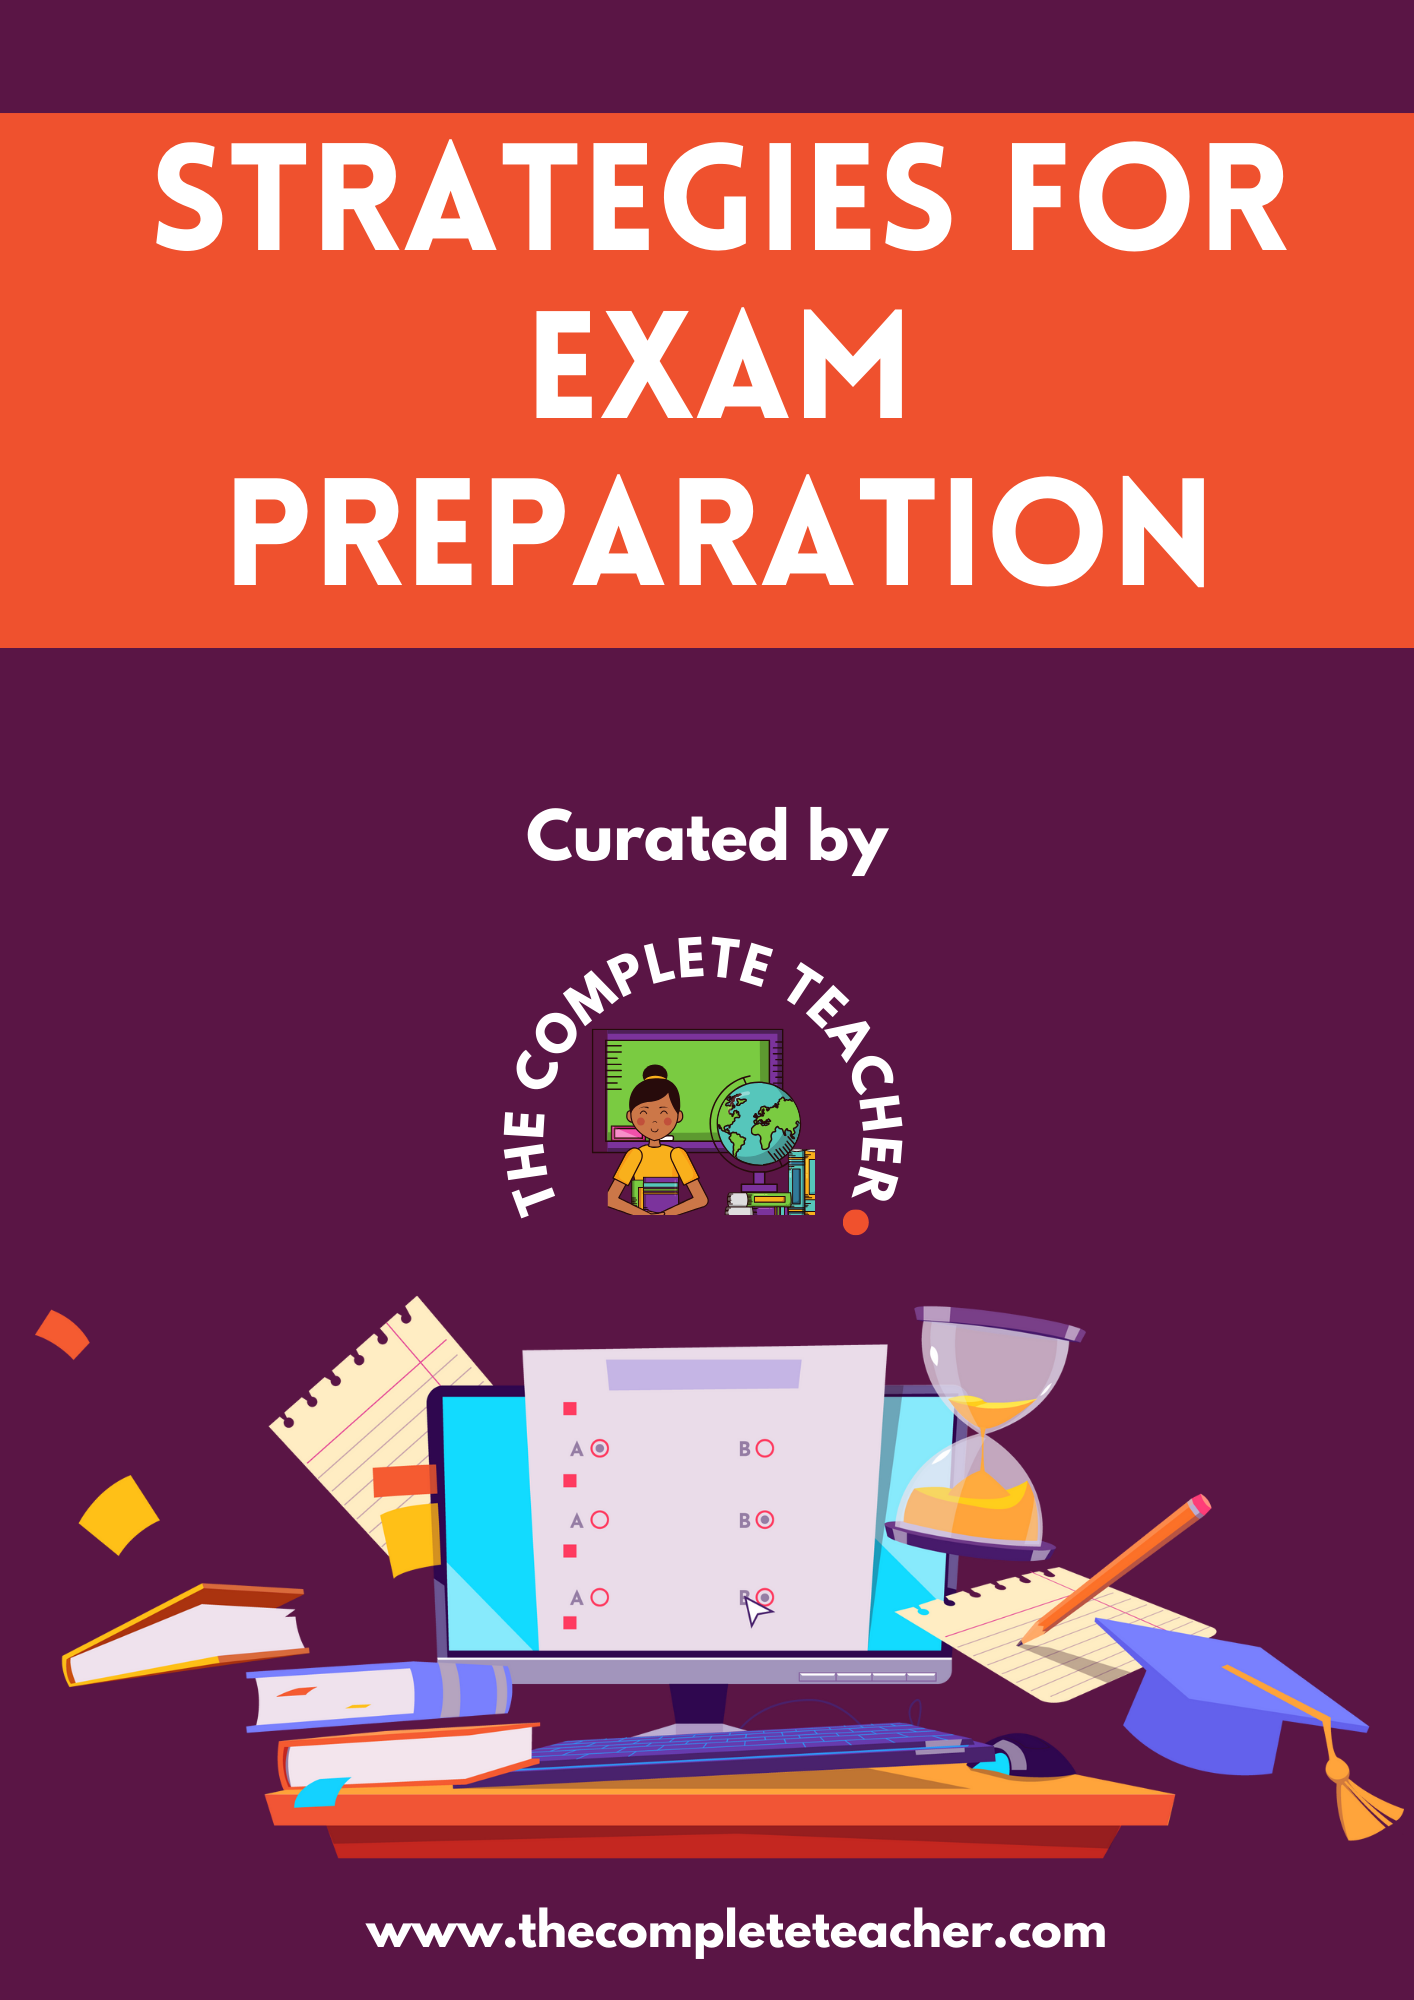 Strategies for exam preparation1F.png